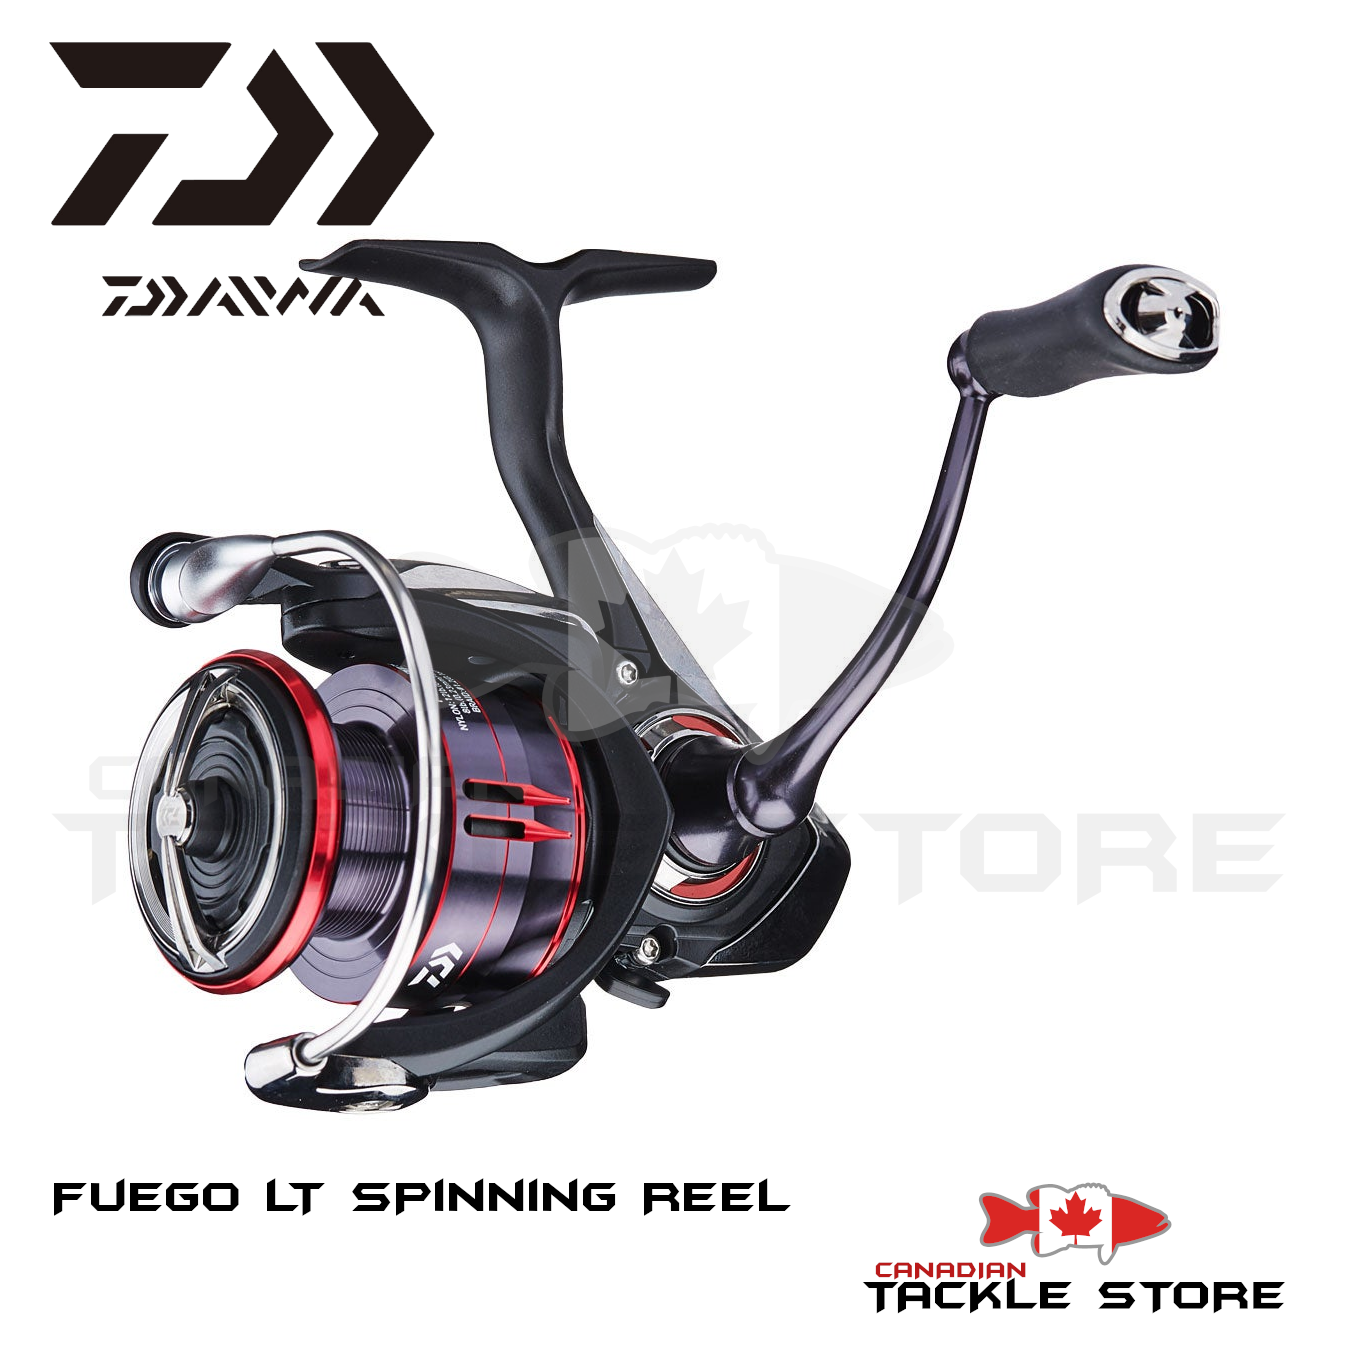 DAIWA CERTATE SPINNING REEL – Canadian Tackle Store